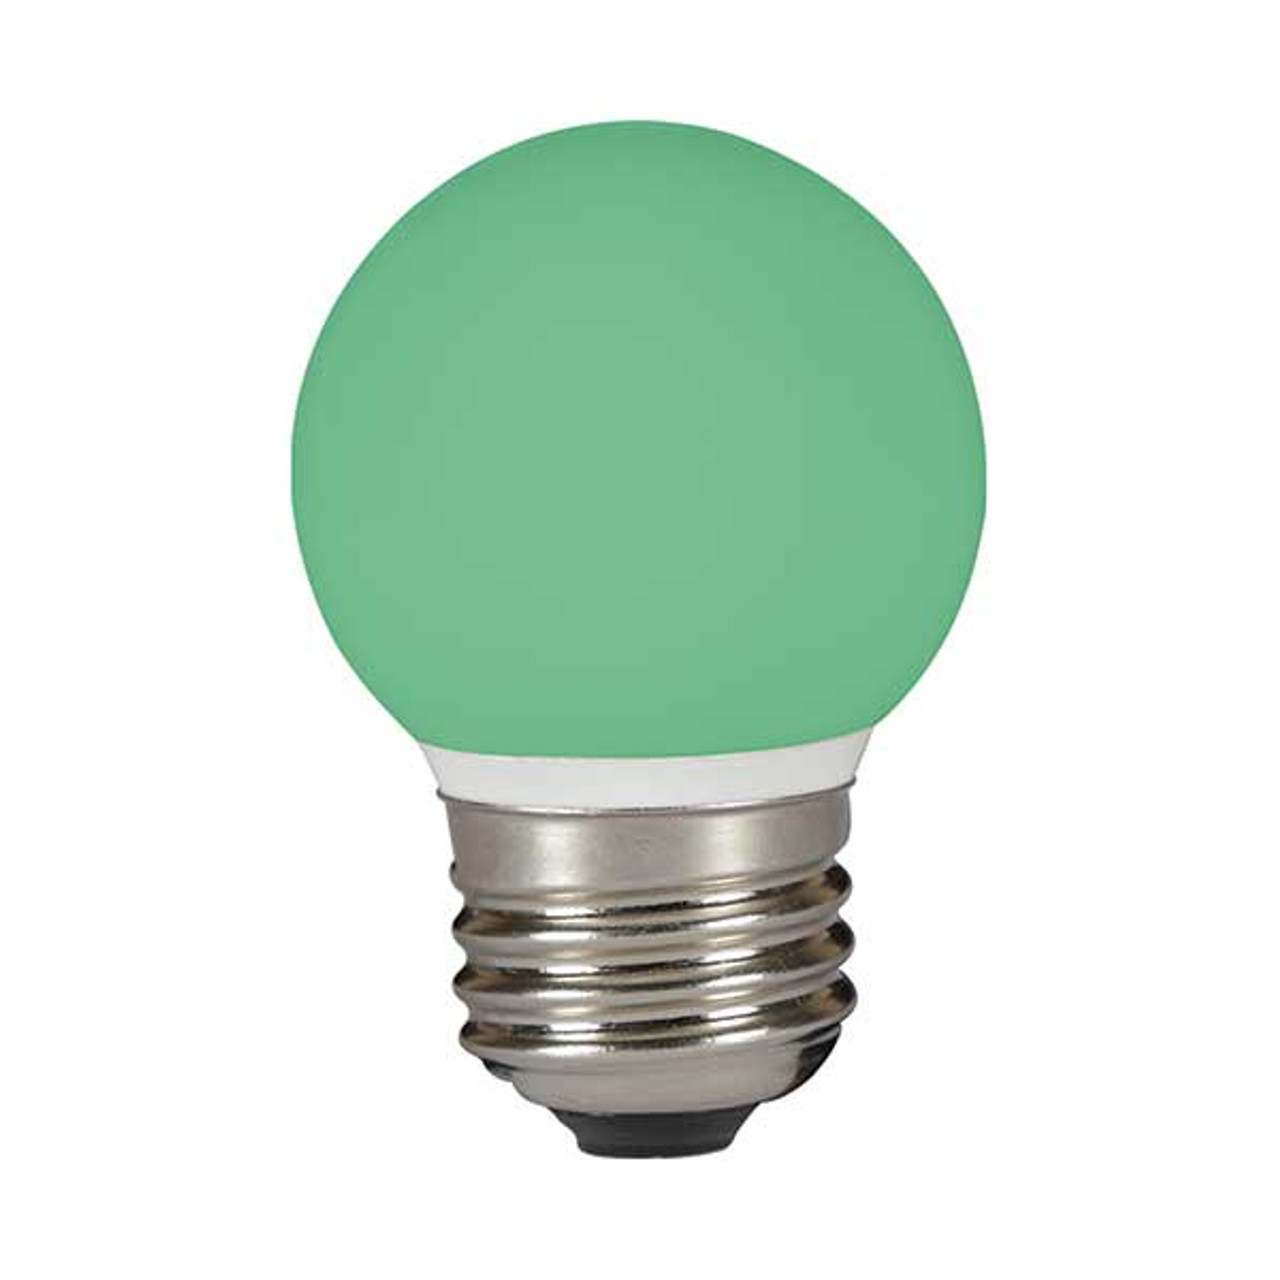 LED 45mm Round 1W E27 Green BELL